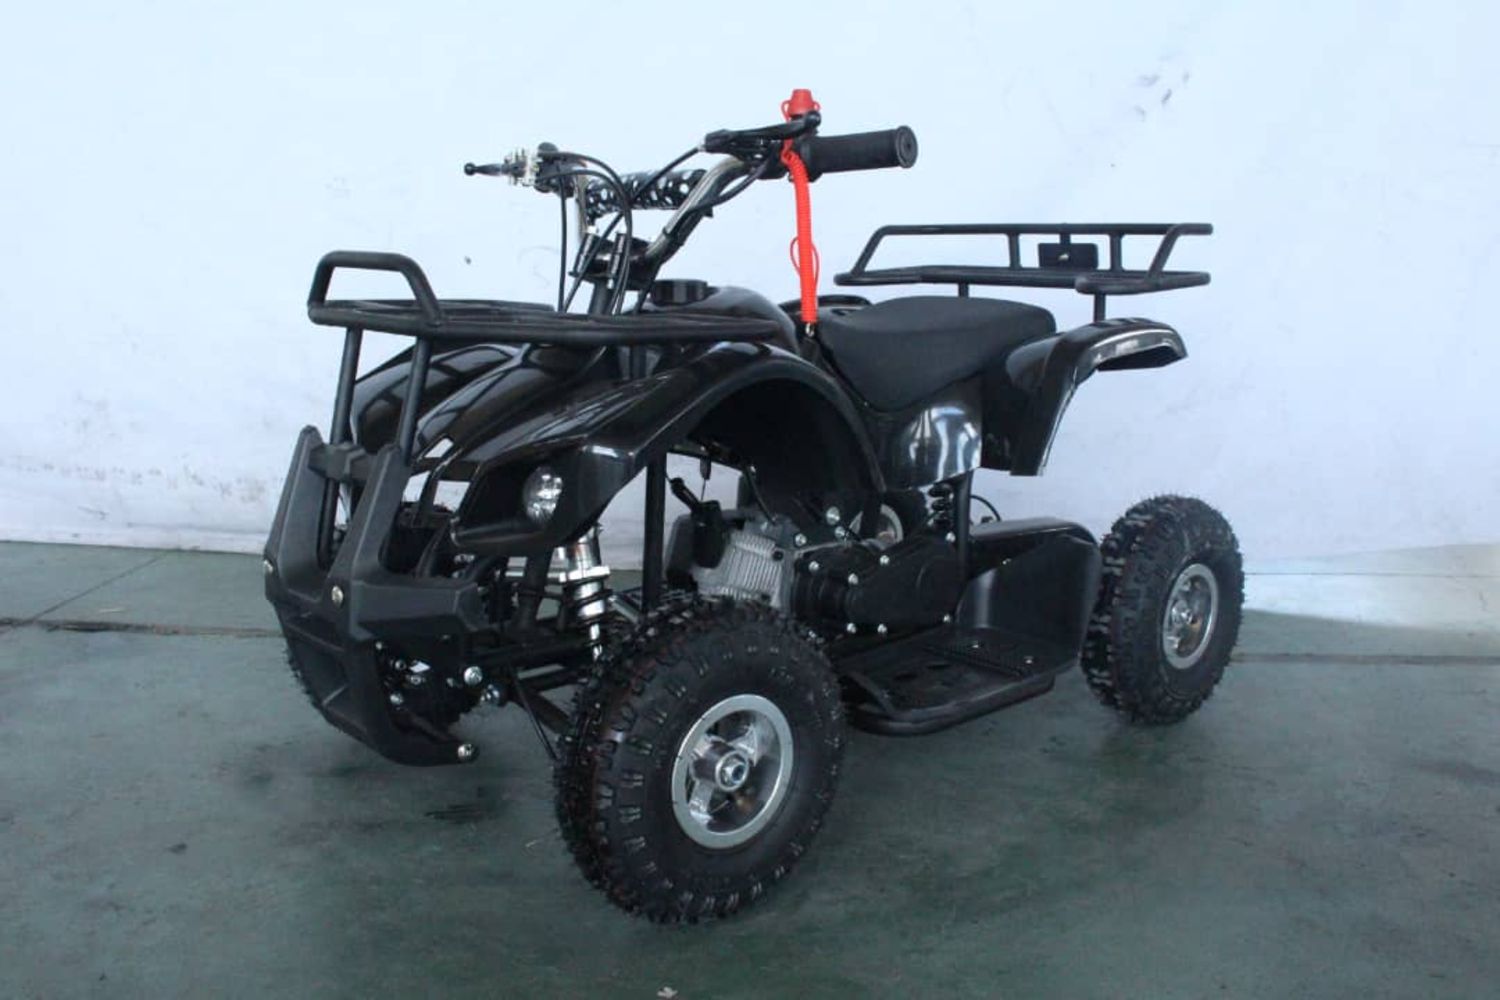 Brand New Quad Bikes + Dirt Bikes: Quads in Two Engine Sizes, Plus Mini Dirt Bikes, Over 170 Lots Available